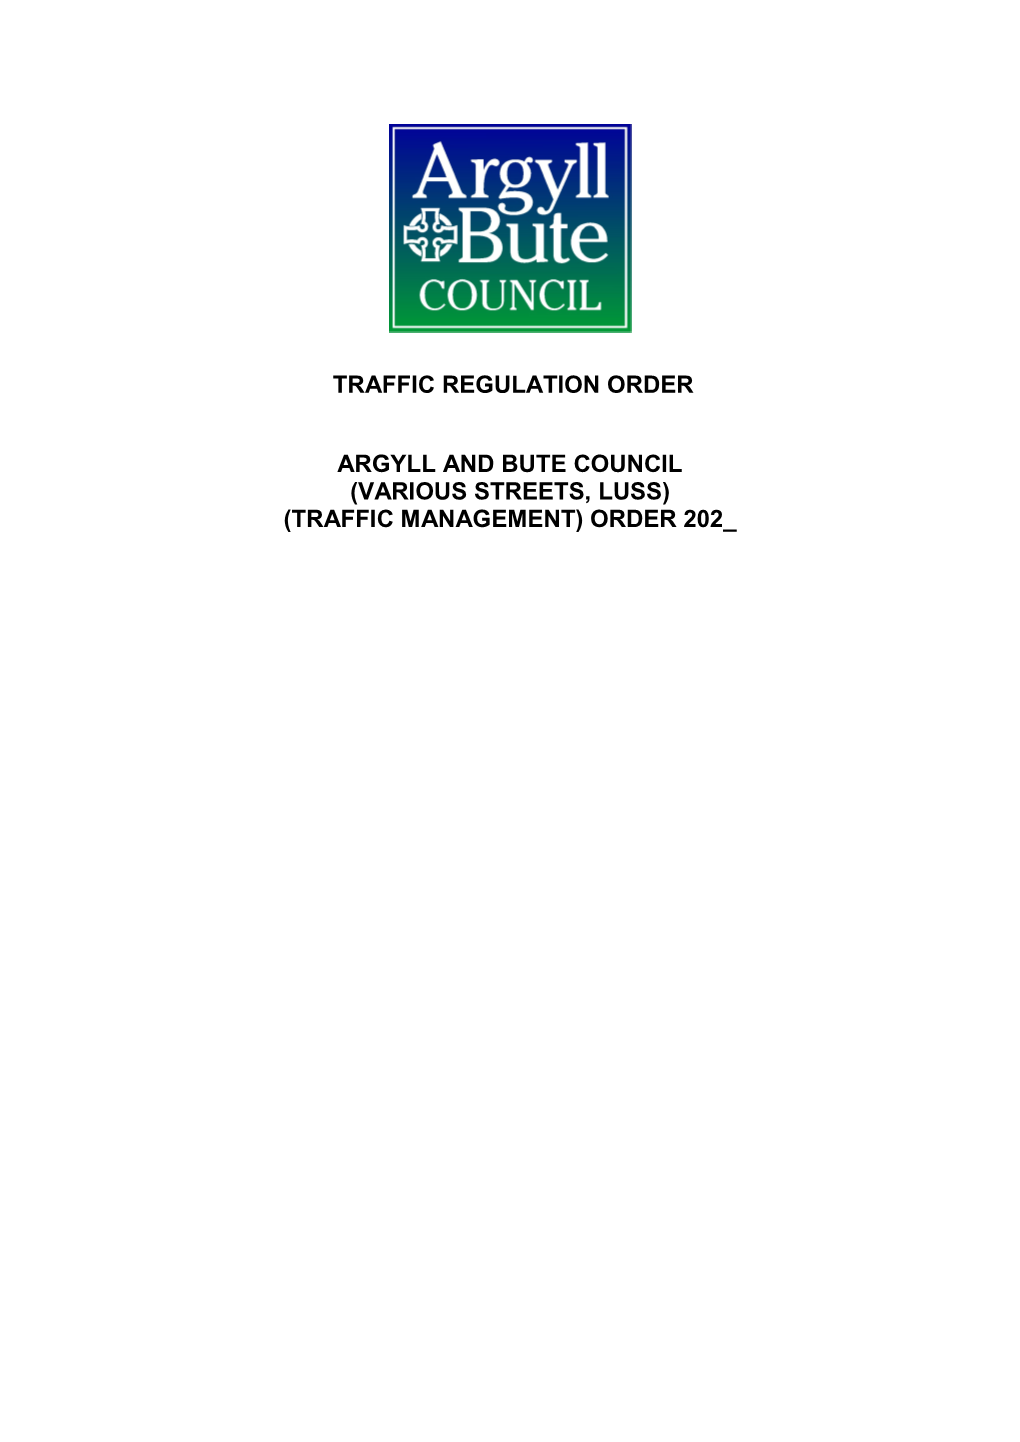 Traffic Regulation Order Argyll and Bute Council (Various Streets, Luss)